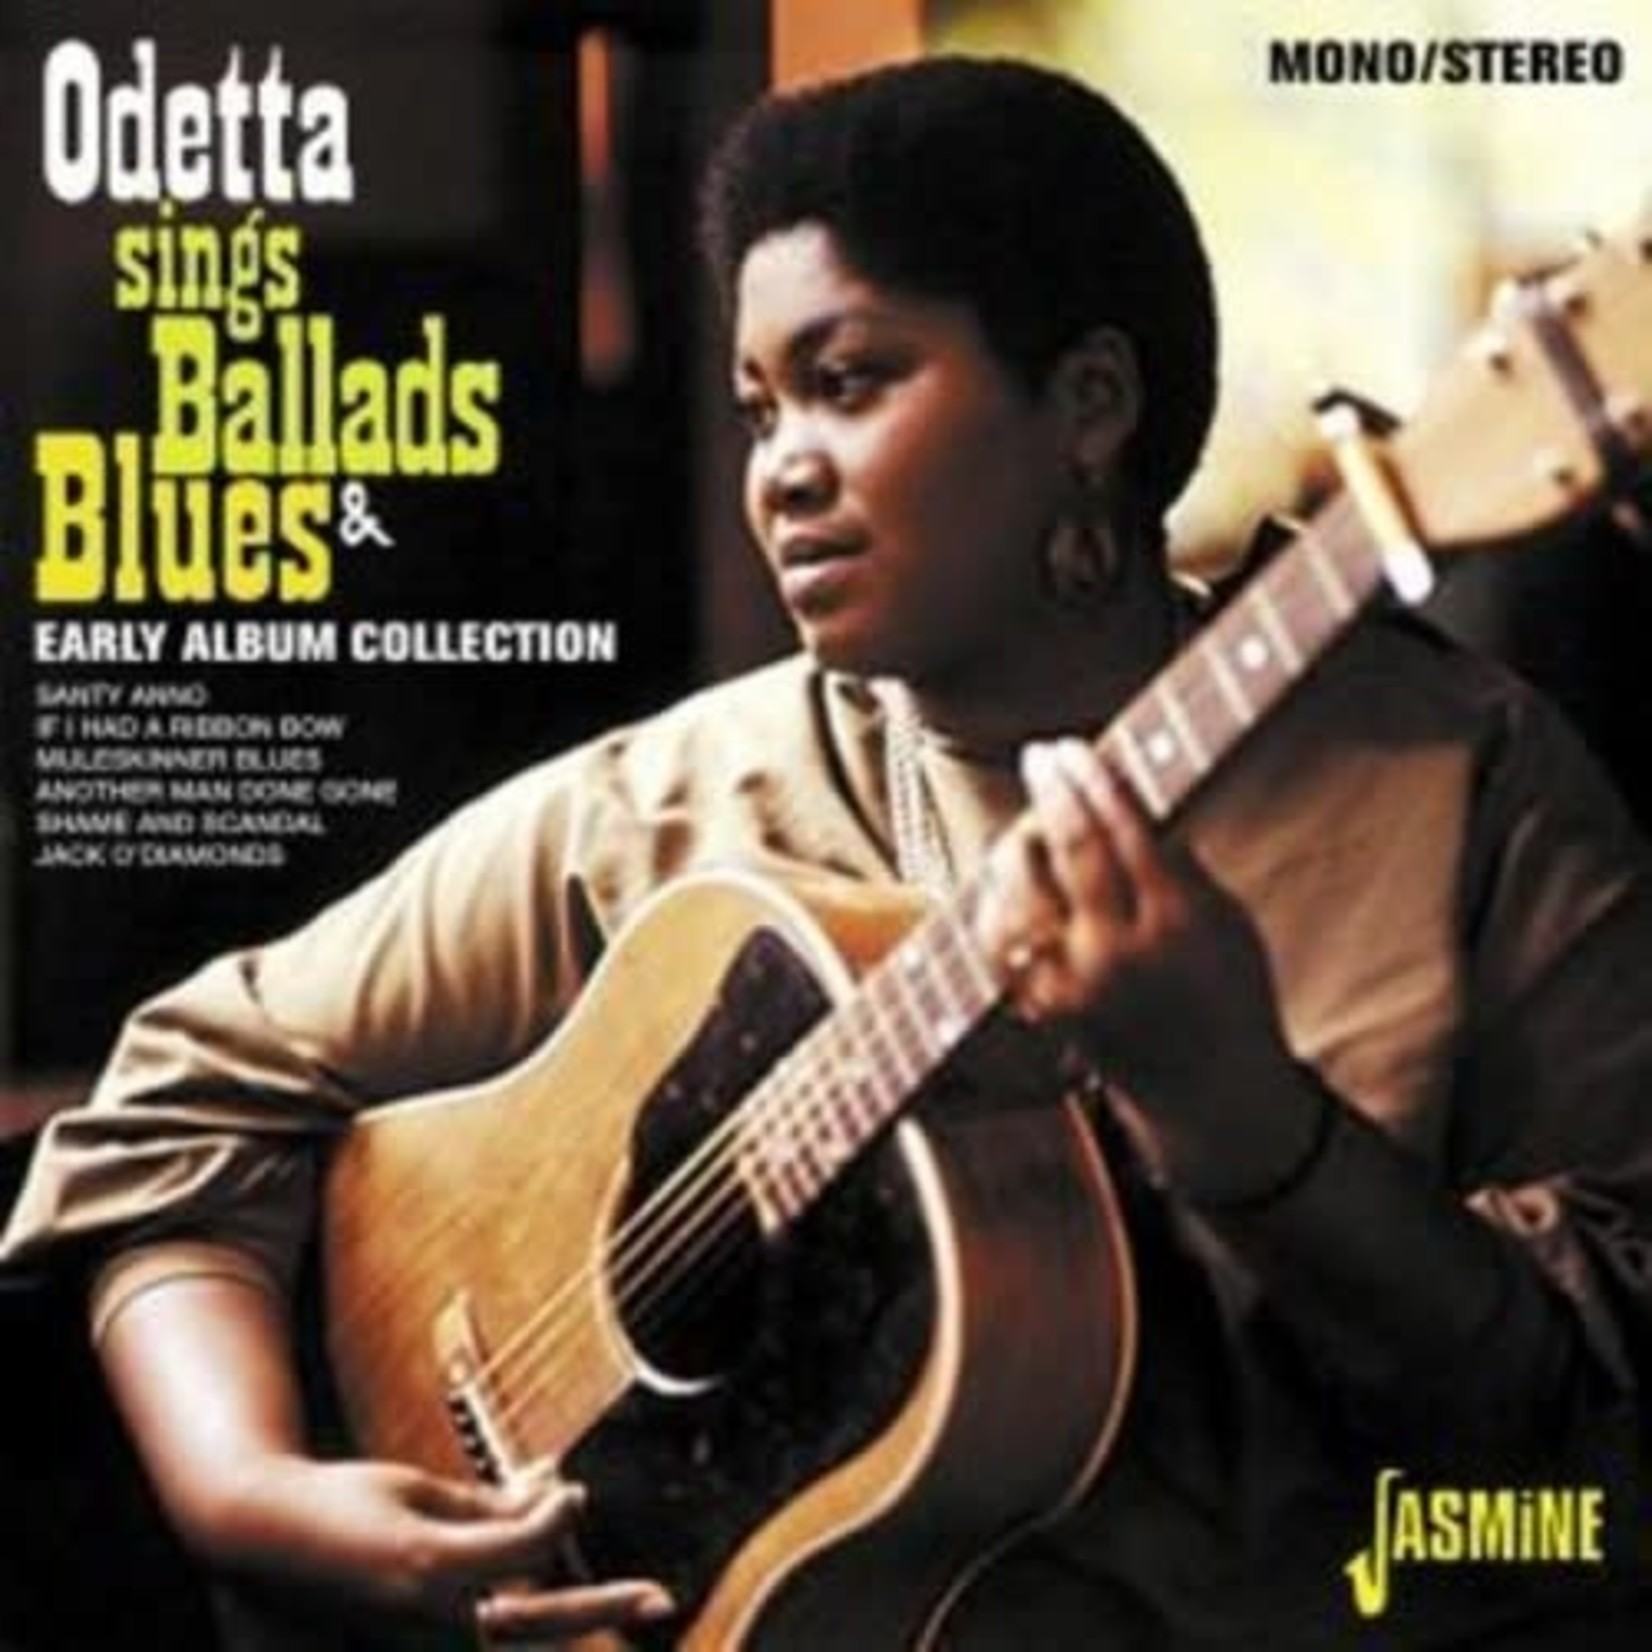 Odetta - Sings Ballads & Blues: Early Album Collection [2CD]